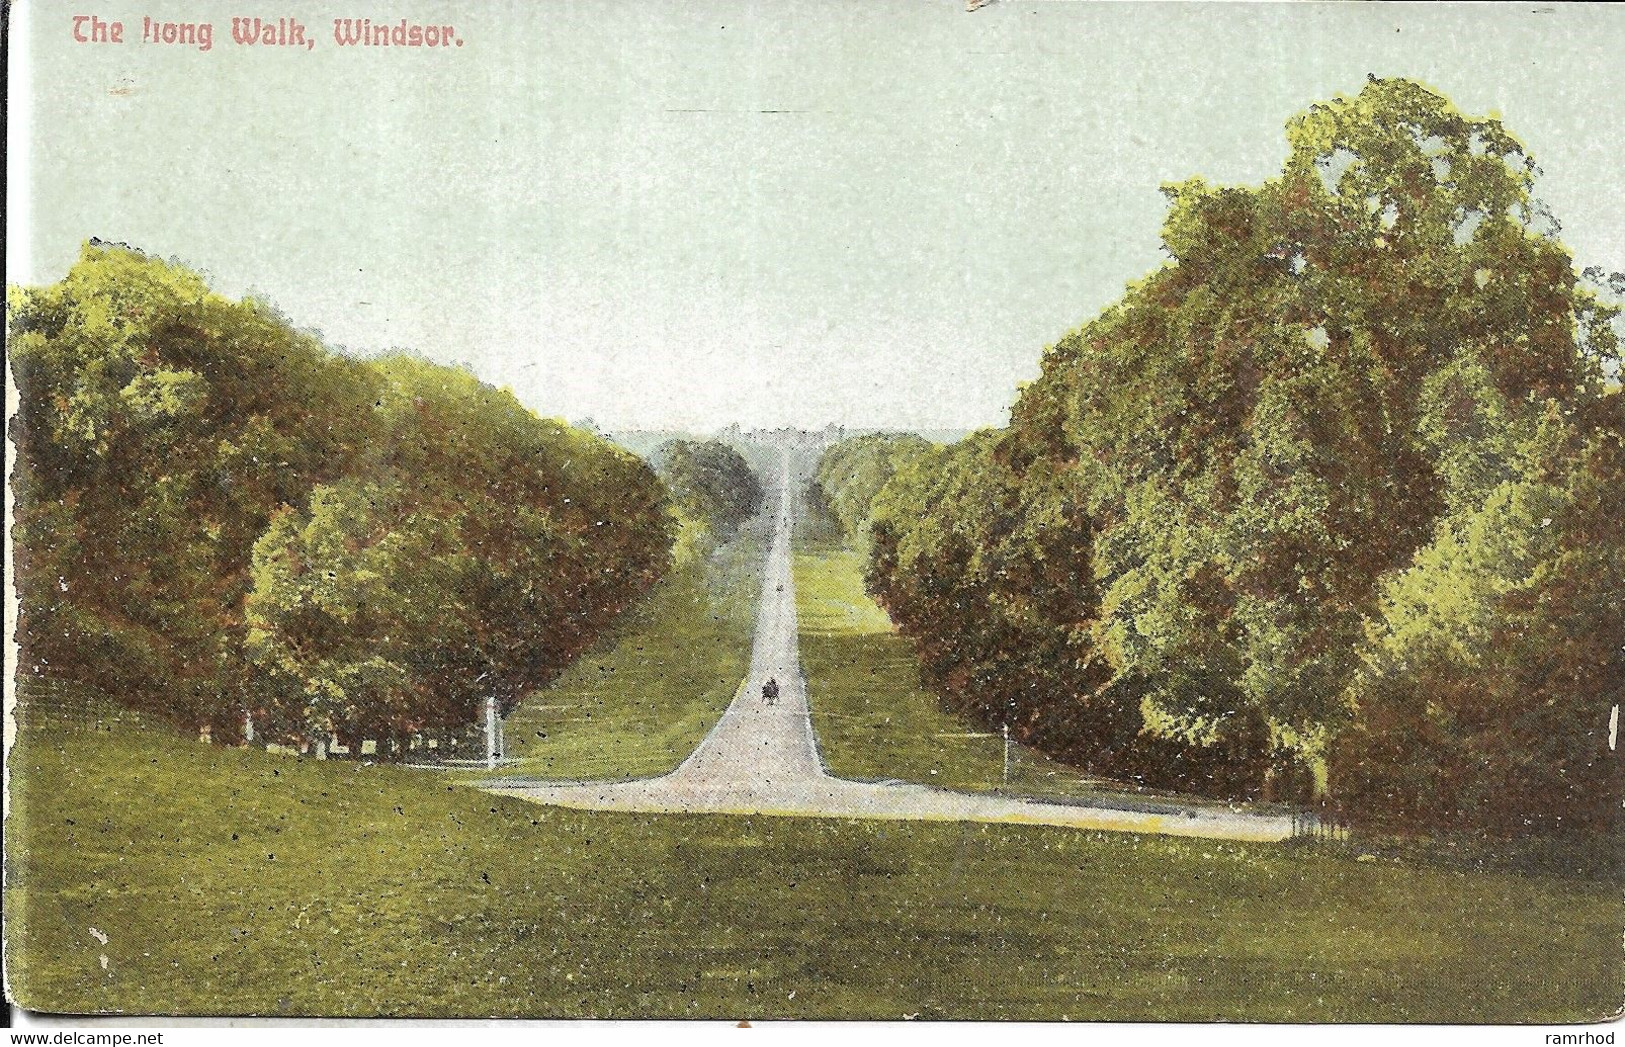 WINDSOR, The Long Walk (Publisher - Marshall's Series) Date - Unknown, Unused - Windsor